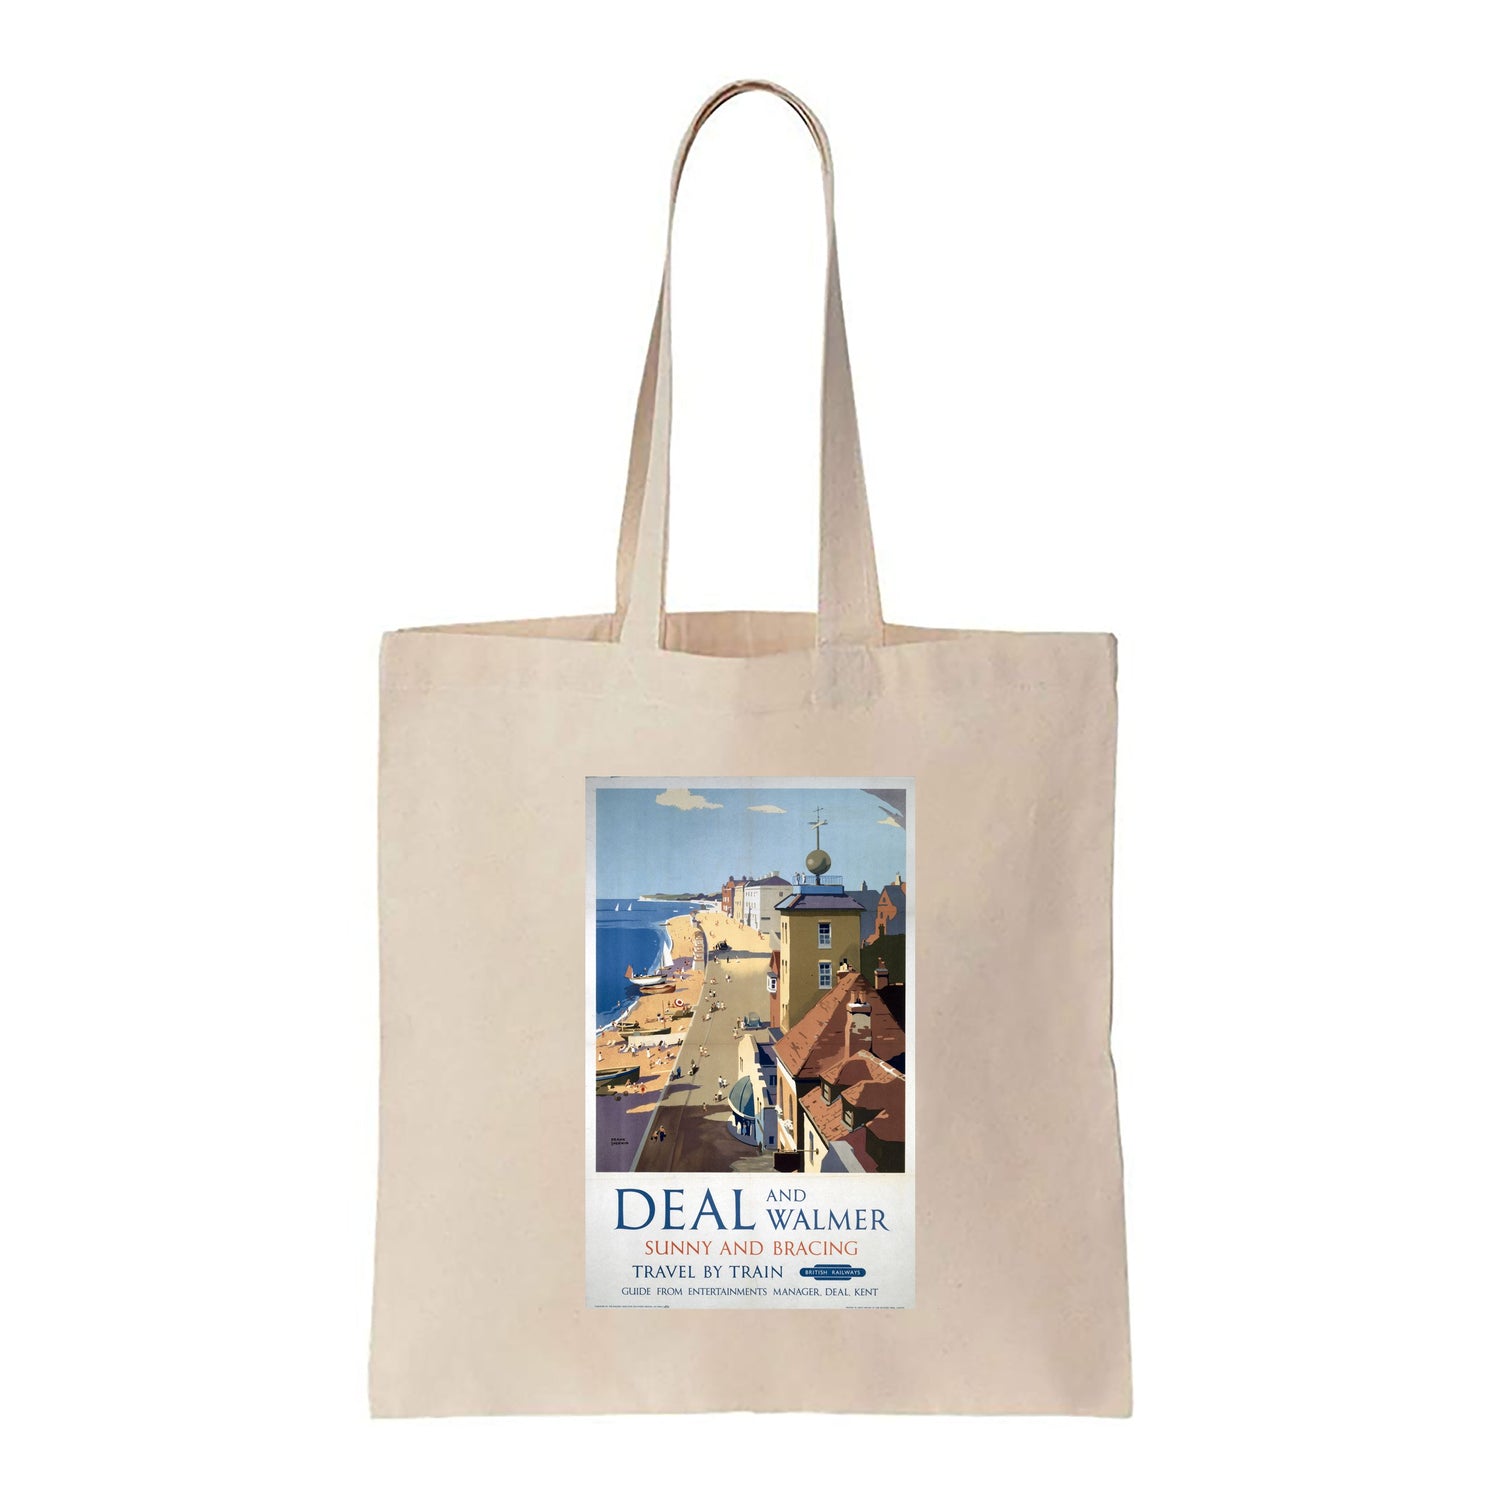 Deal and Walmer, Sunny and Bracing - Canvas Tote Bag